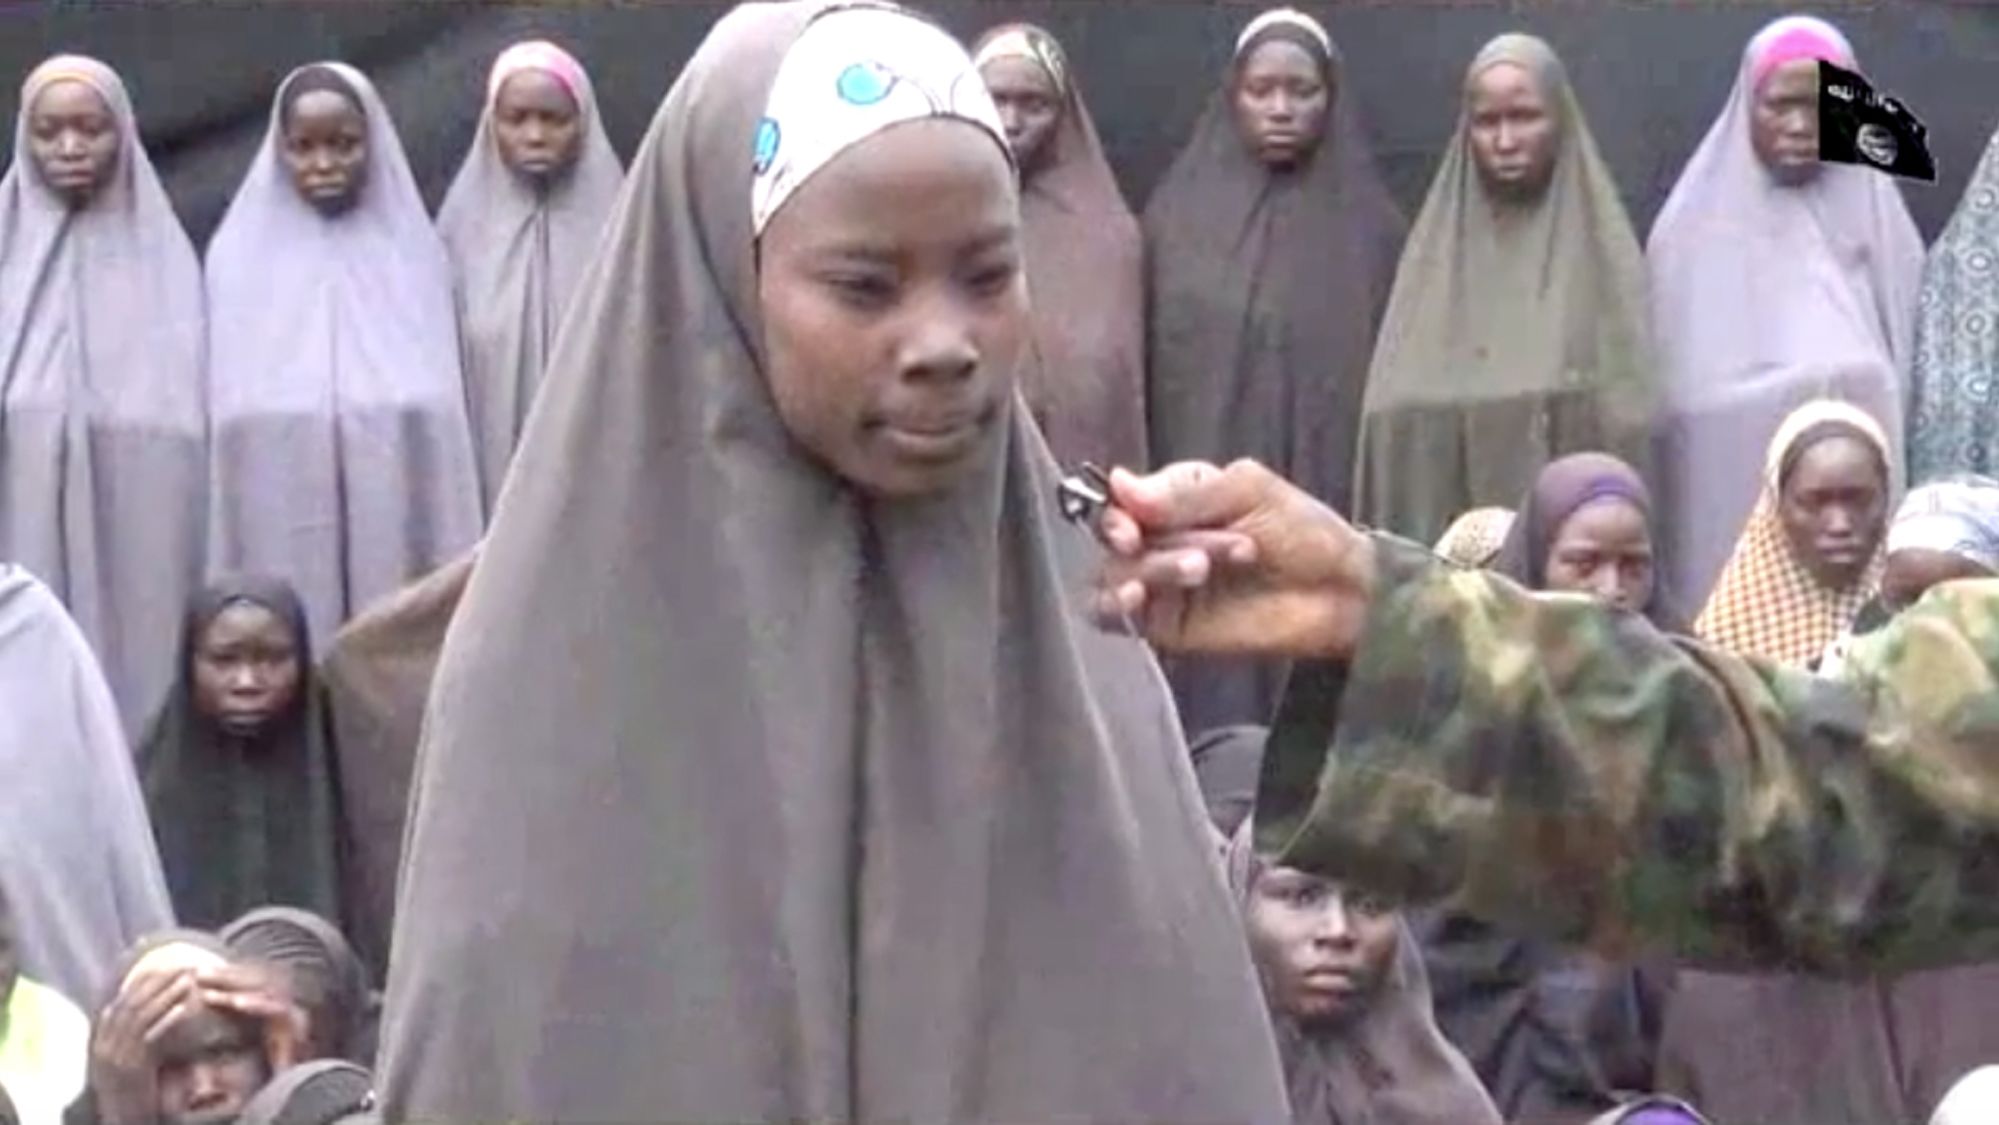 One of the missing schoolgirls shown in the video. 